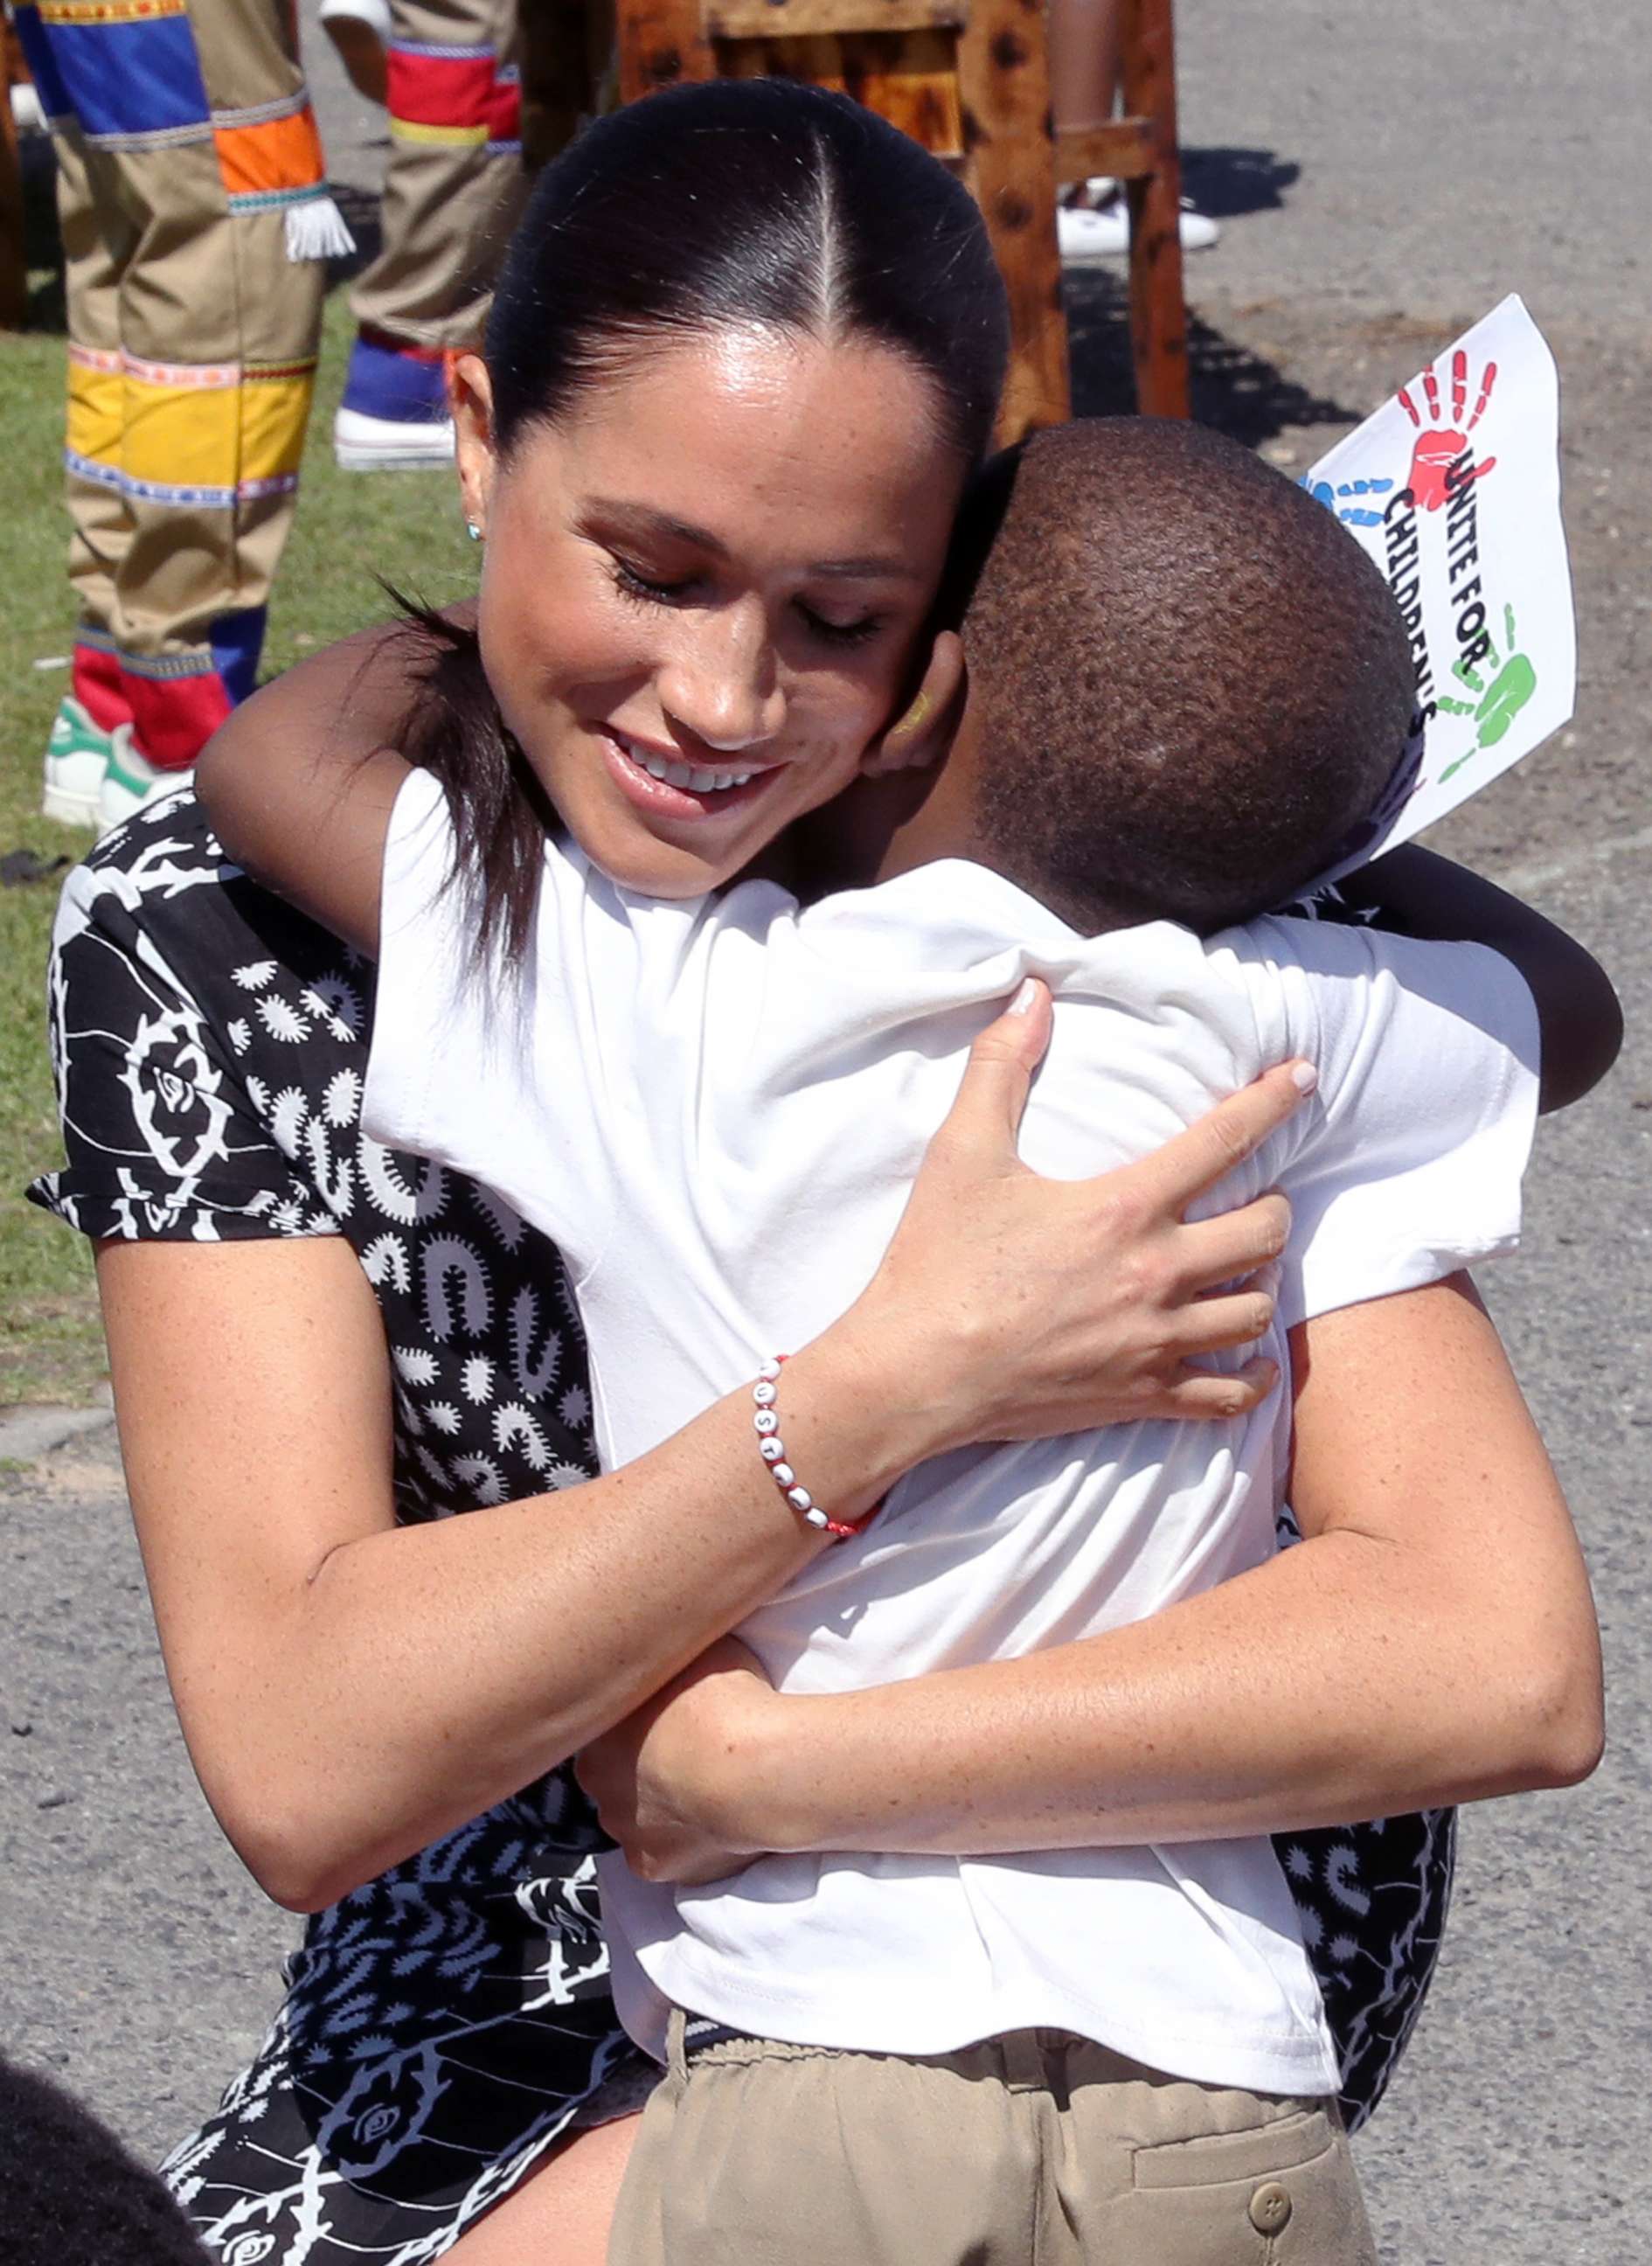 PHOTO: Meghan, Duchess of Sussex receives a hug from a young boy during a visit at a Justice Desk initiative in Nyanga township, with Prince Harry, Duke of Sussex, during their royal tour of South Africa, Sept. 23, 2019 in Cape Town, South Africa.